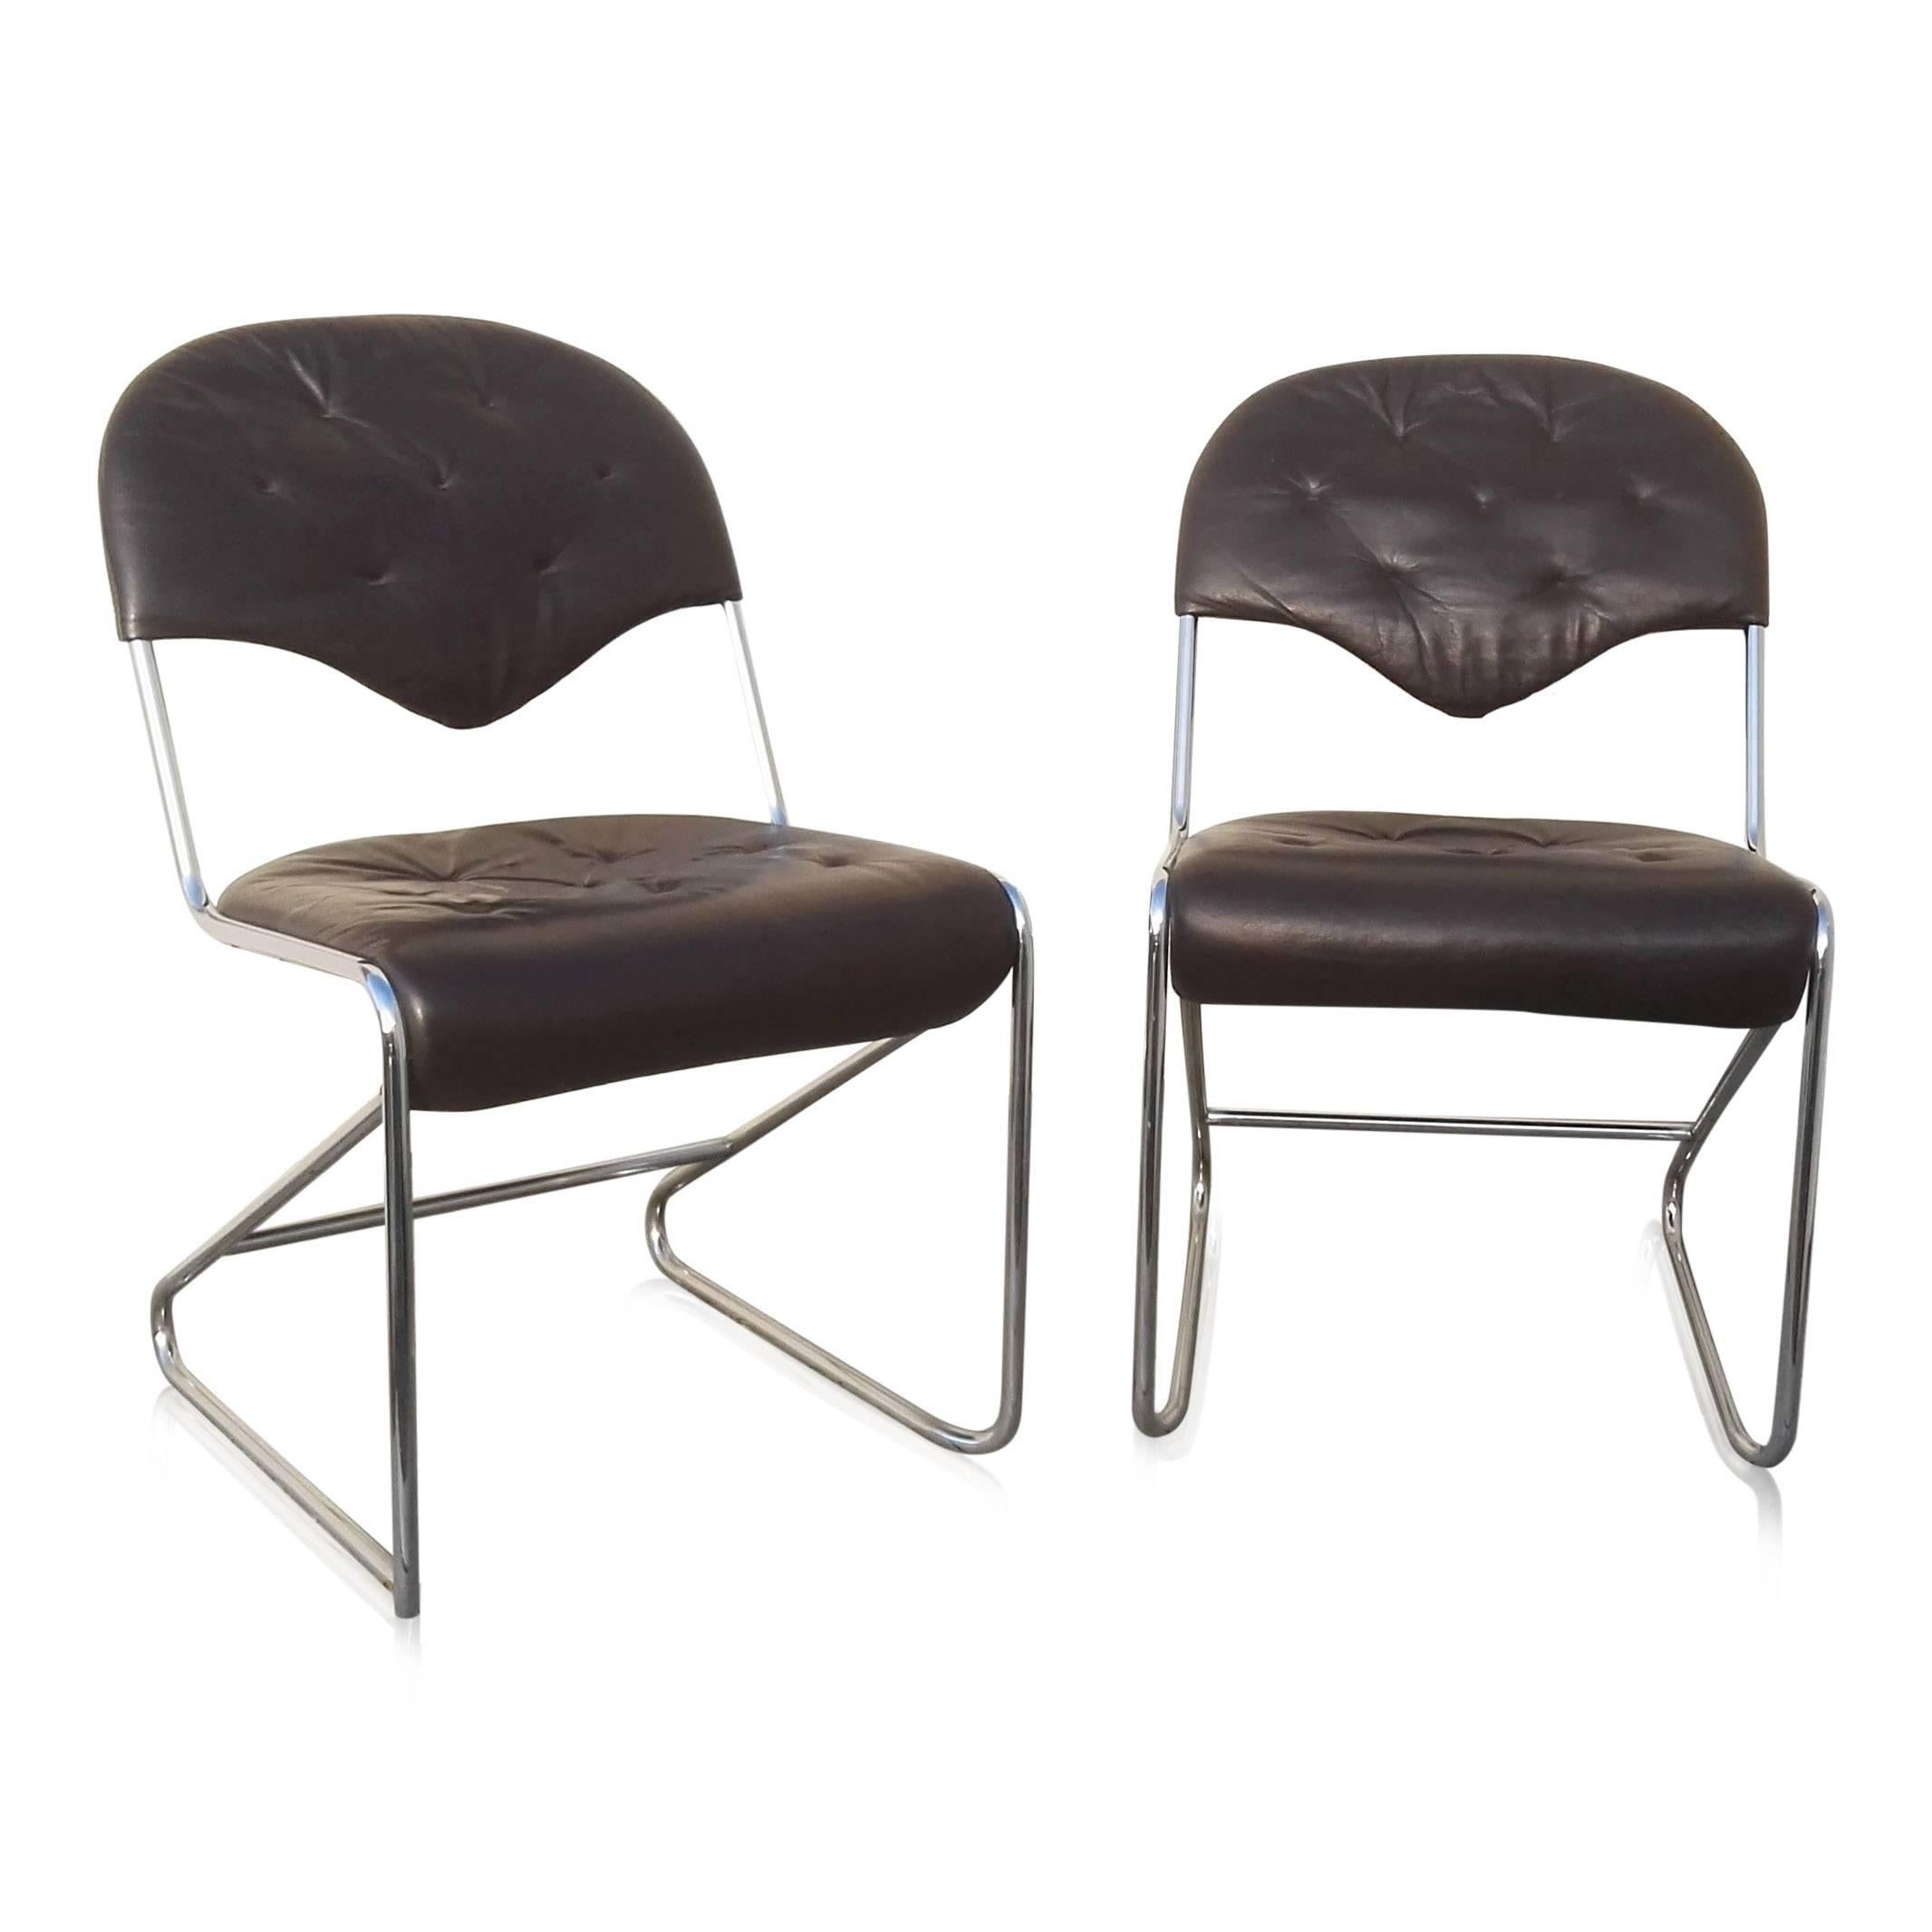 Italian Pair of Chrome and Leather Chairs in the Style of Faleschini, Italy, 1970s